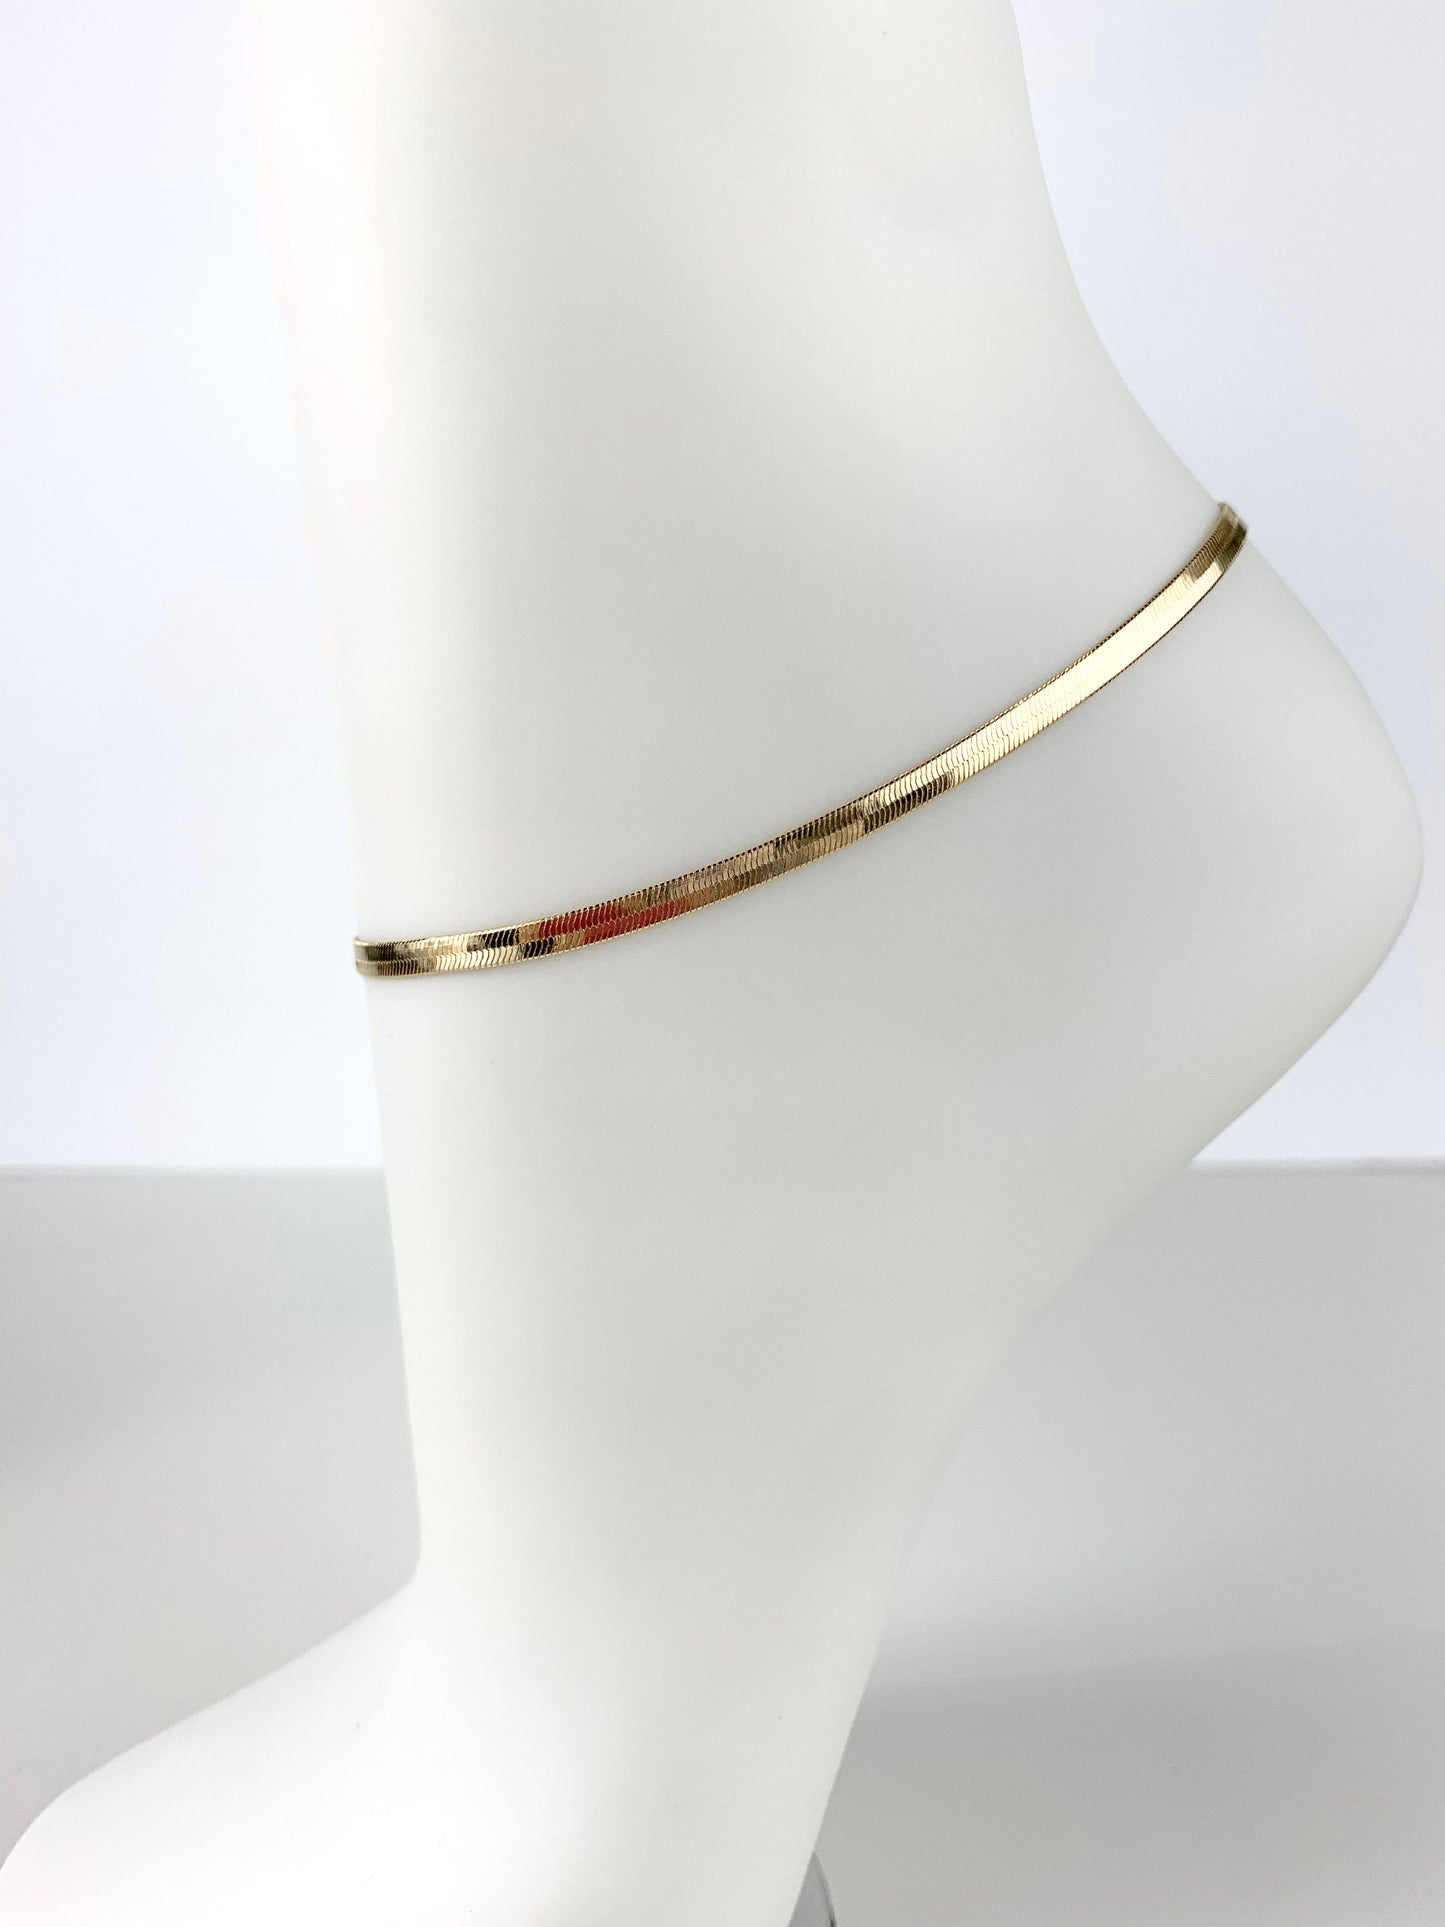 14k Gold Filled Plain Herringbone Link Anklet 3mm Thickness Wholesale Jewelry Making Supplies